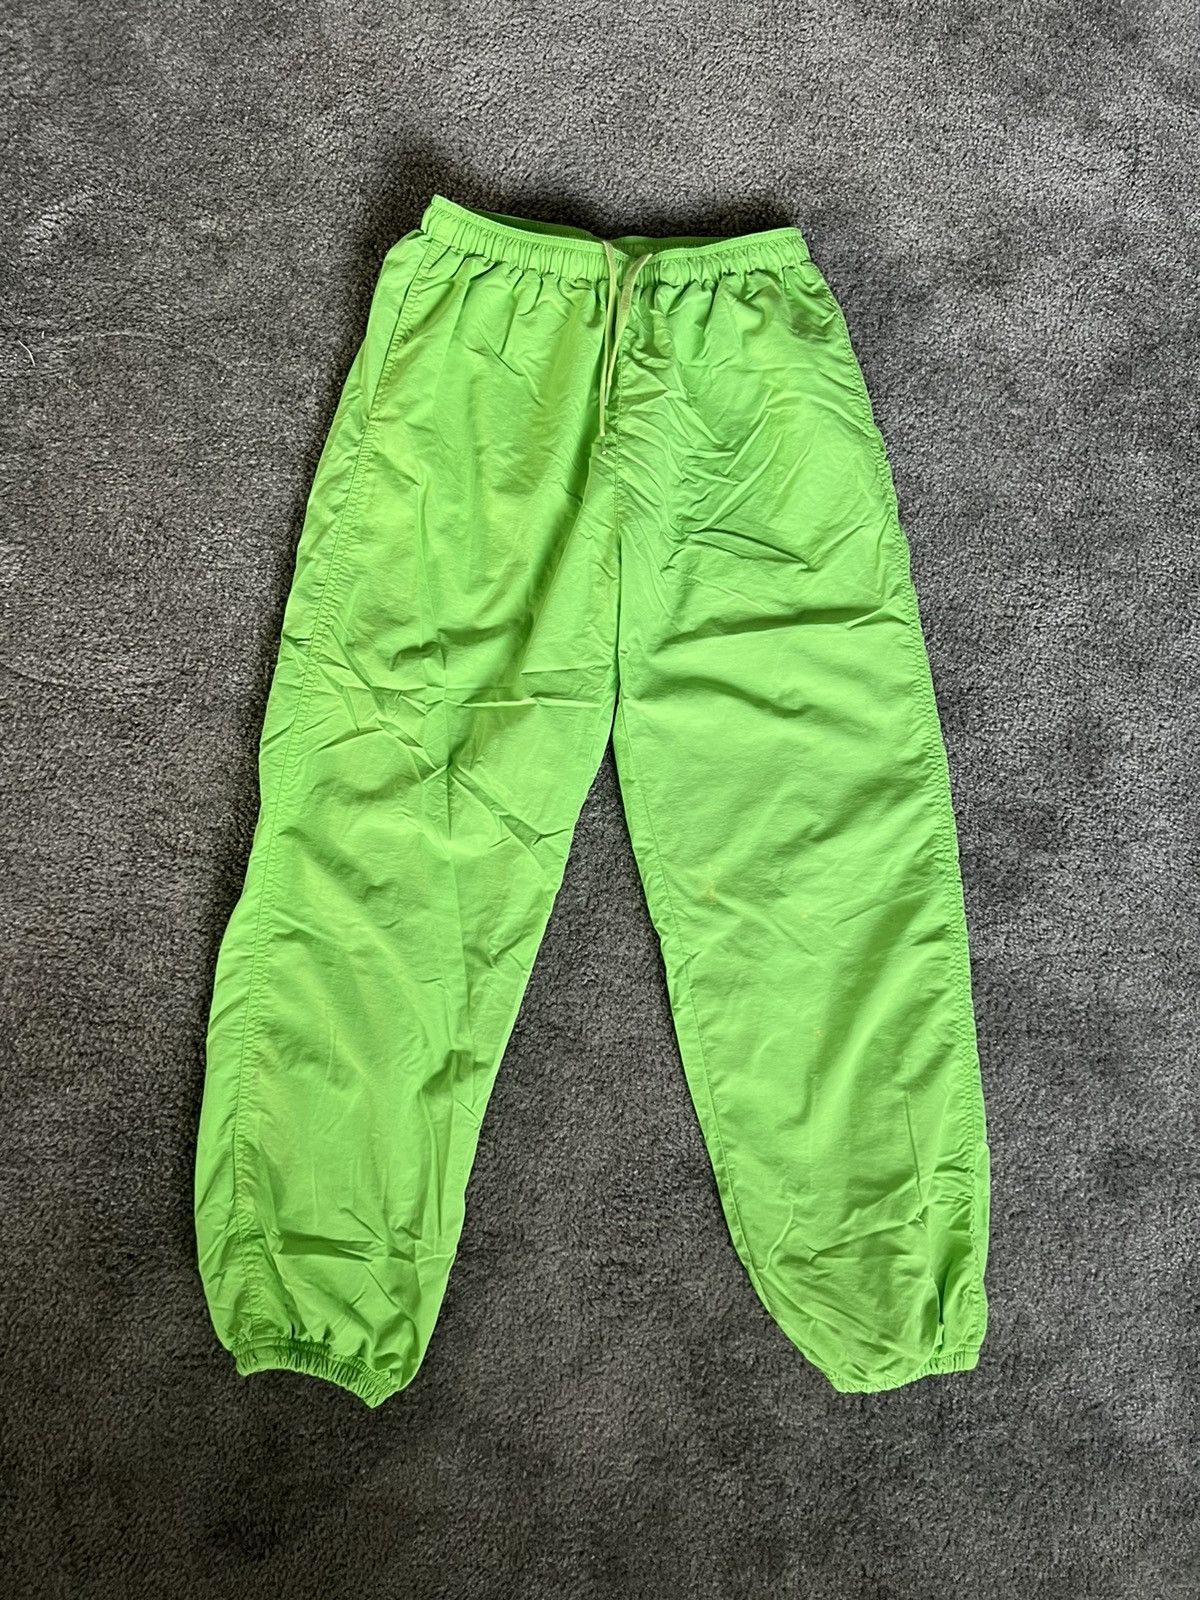 Undefeated Undefeated Neon Electric Green Nylon Sweat Track Pants